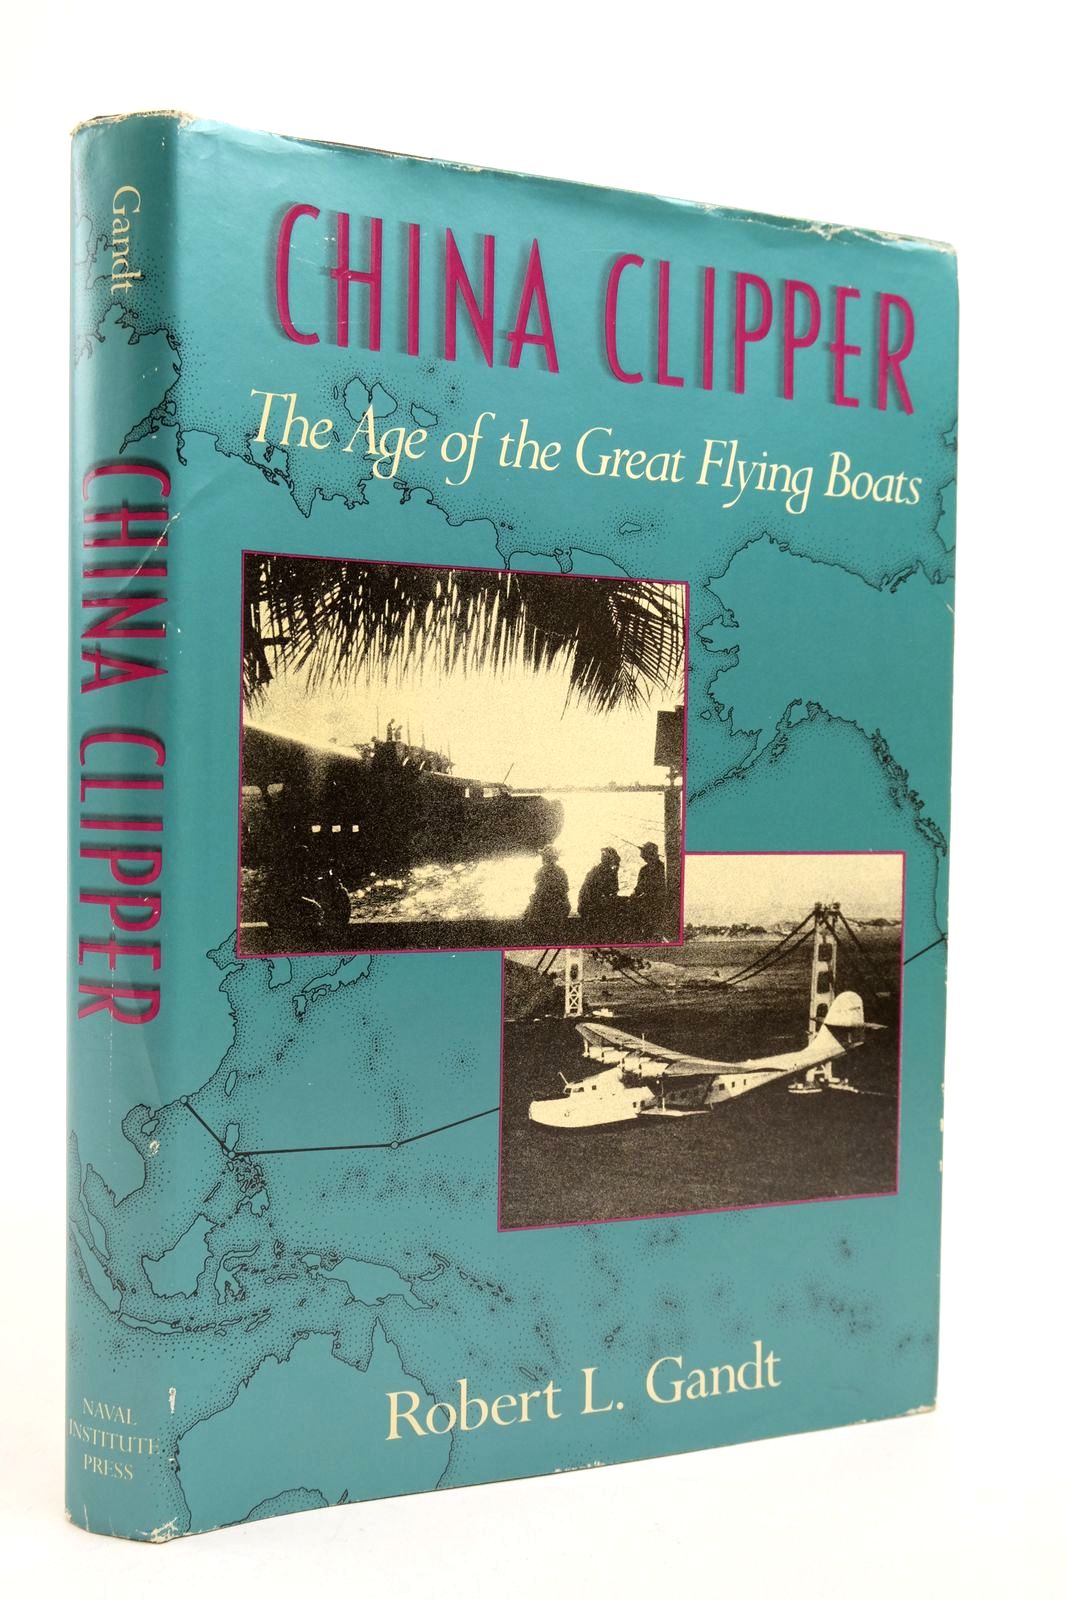 Photo of CHINA CLIPPER THE AGE OF THE GREAT FLYING BOATS- Stock Number: 2139437